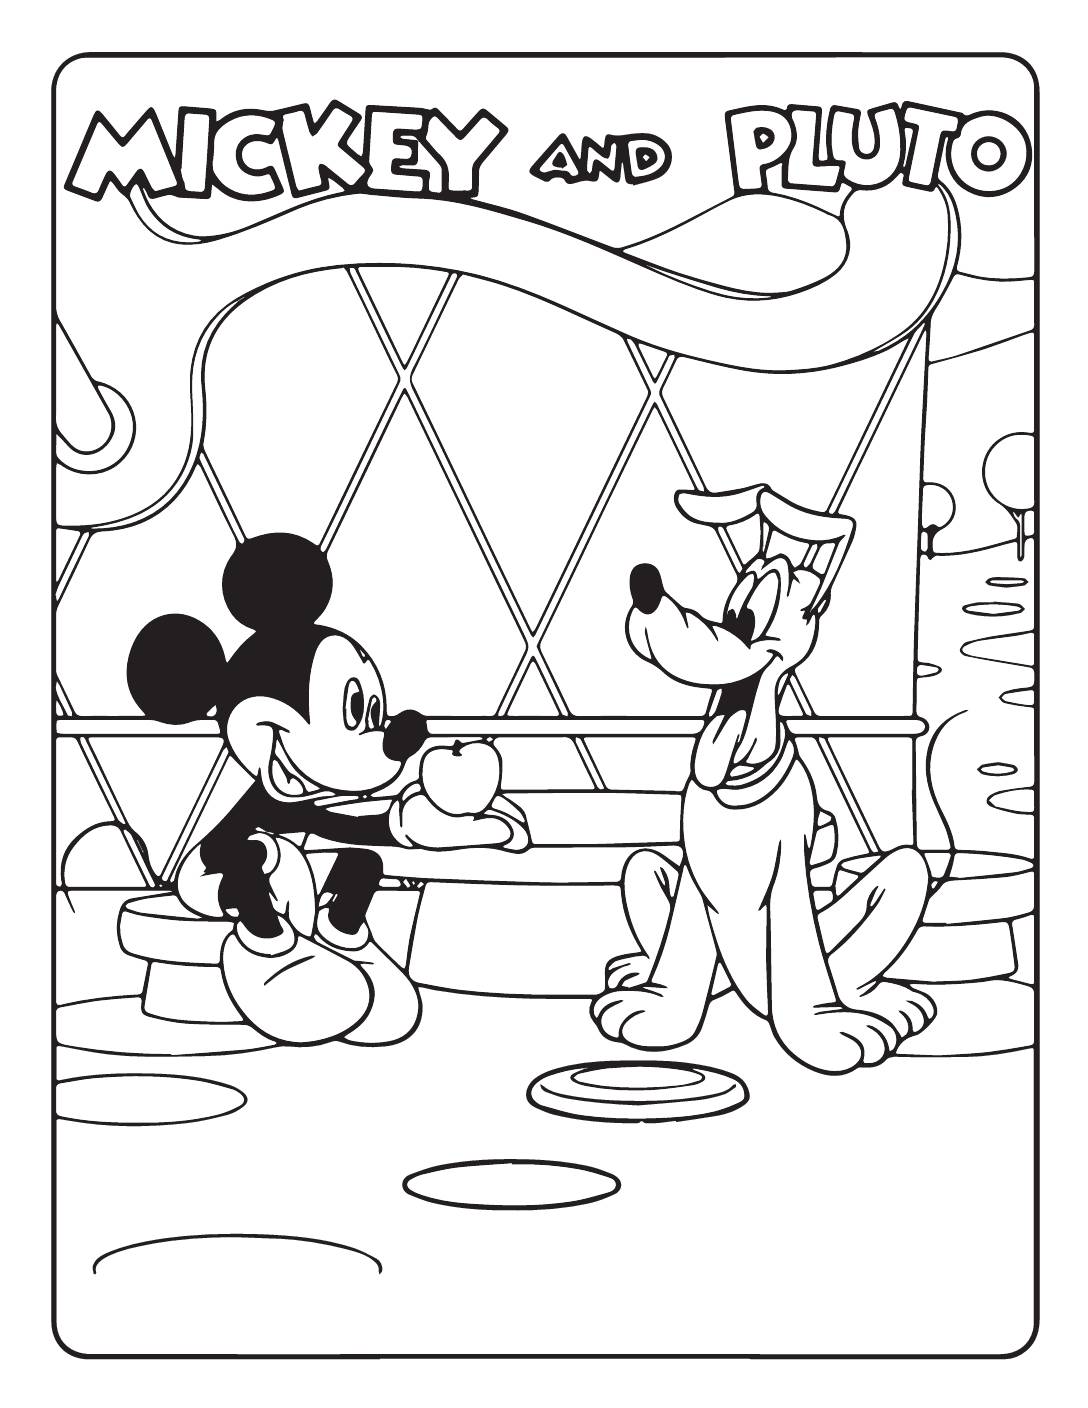 Mickey & Pluto Coloring Page Coloring Pages